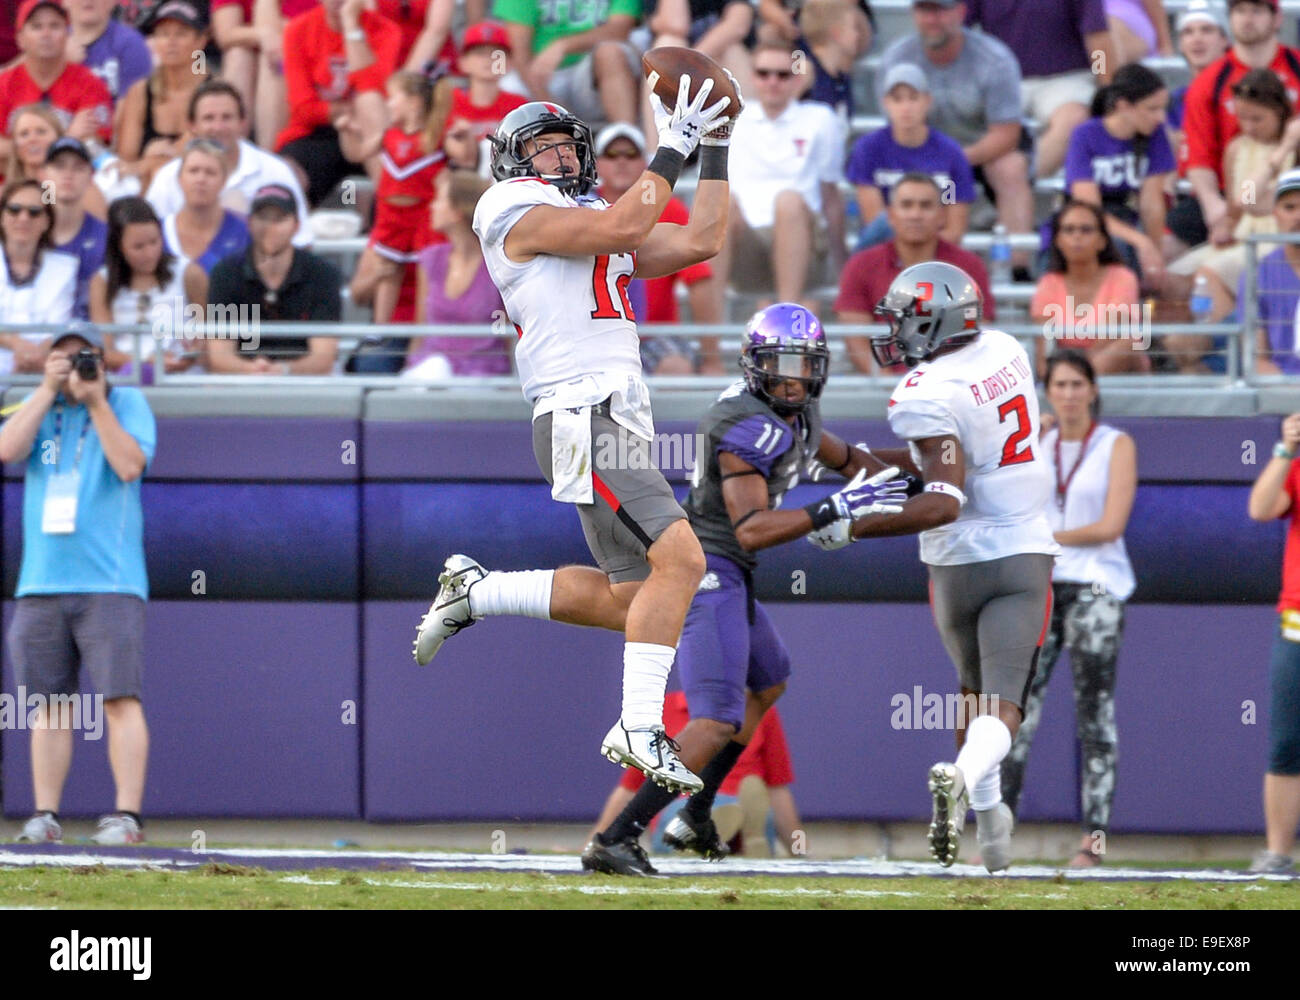 October 25th, 2014: .Texas Tech Red Raiders wide receiver Ian Sadler (12) catches a pass inside the 10 yd of an NCAA football game between the Texas Tech Red Raiders and the TCU Horned Frogs at Amon G. Carter Stadium in Fort Worth, Texas. Stock Photo